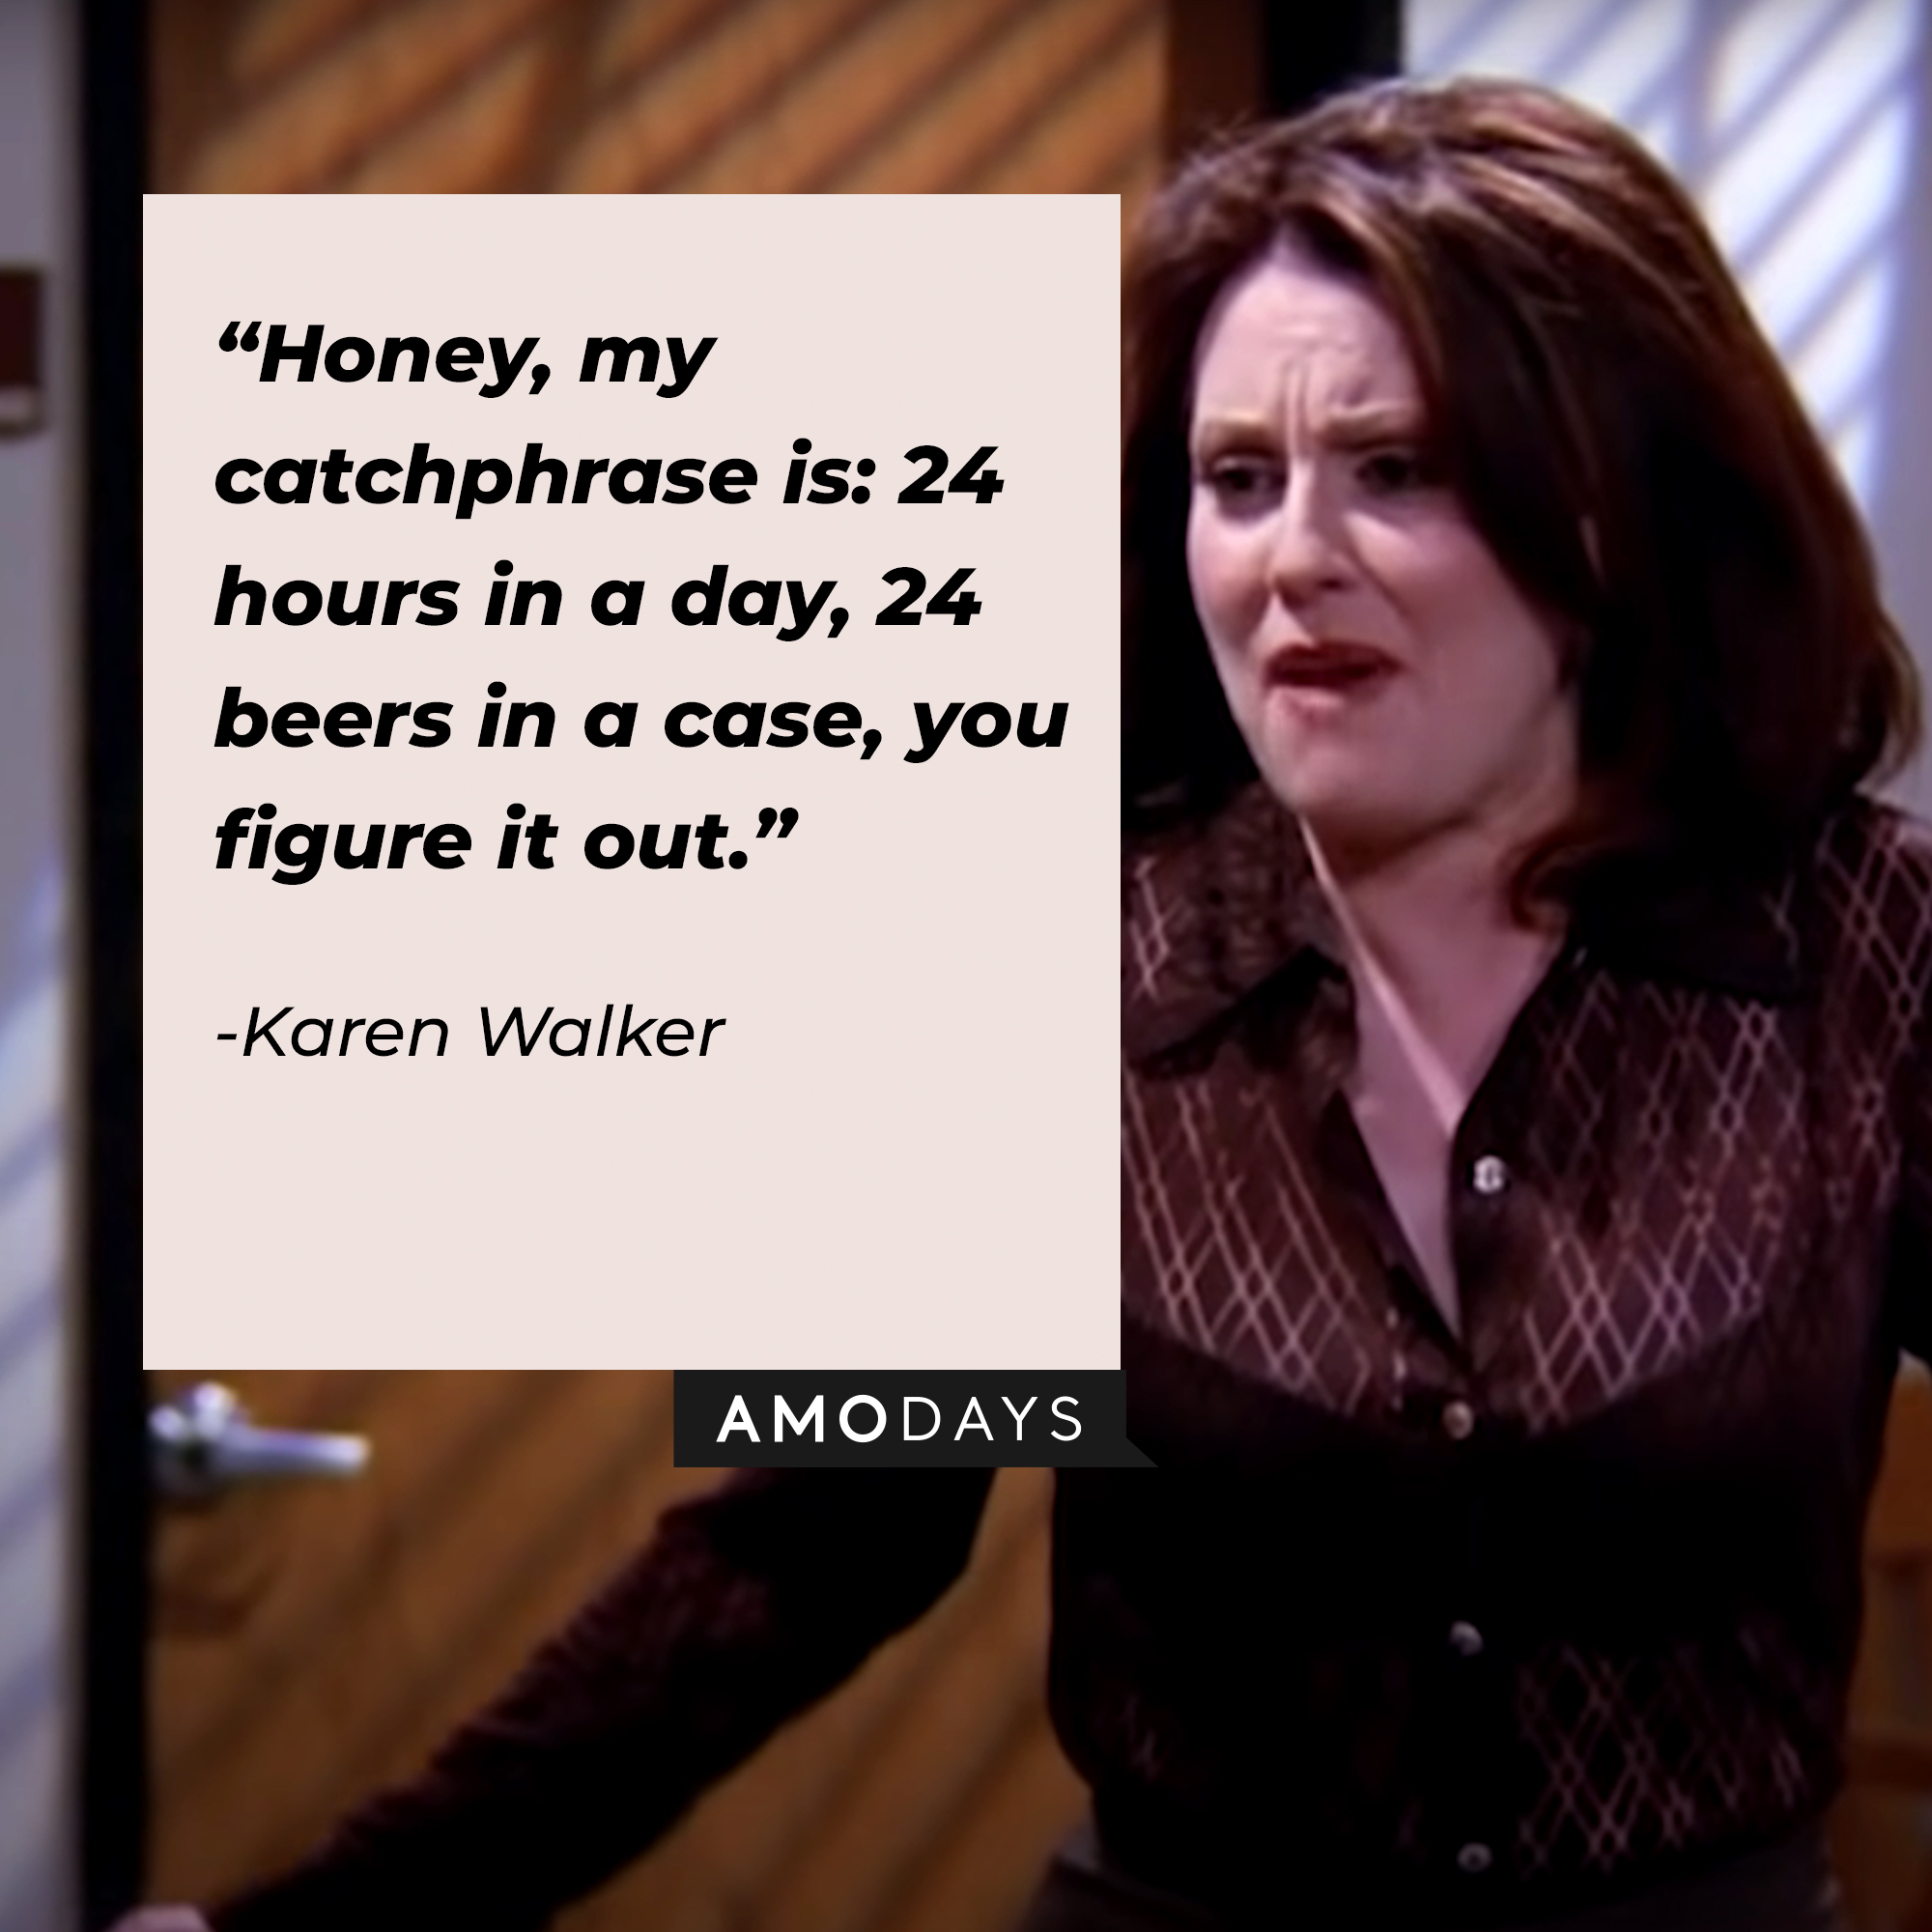 A photo of Karen Walker with the quote, "Honey, my catchphrase is: 24 hours in a day, 24 beers in a case, you figure it out." | Source: YouTube/ComedyBites